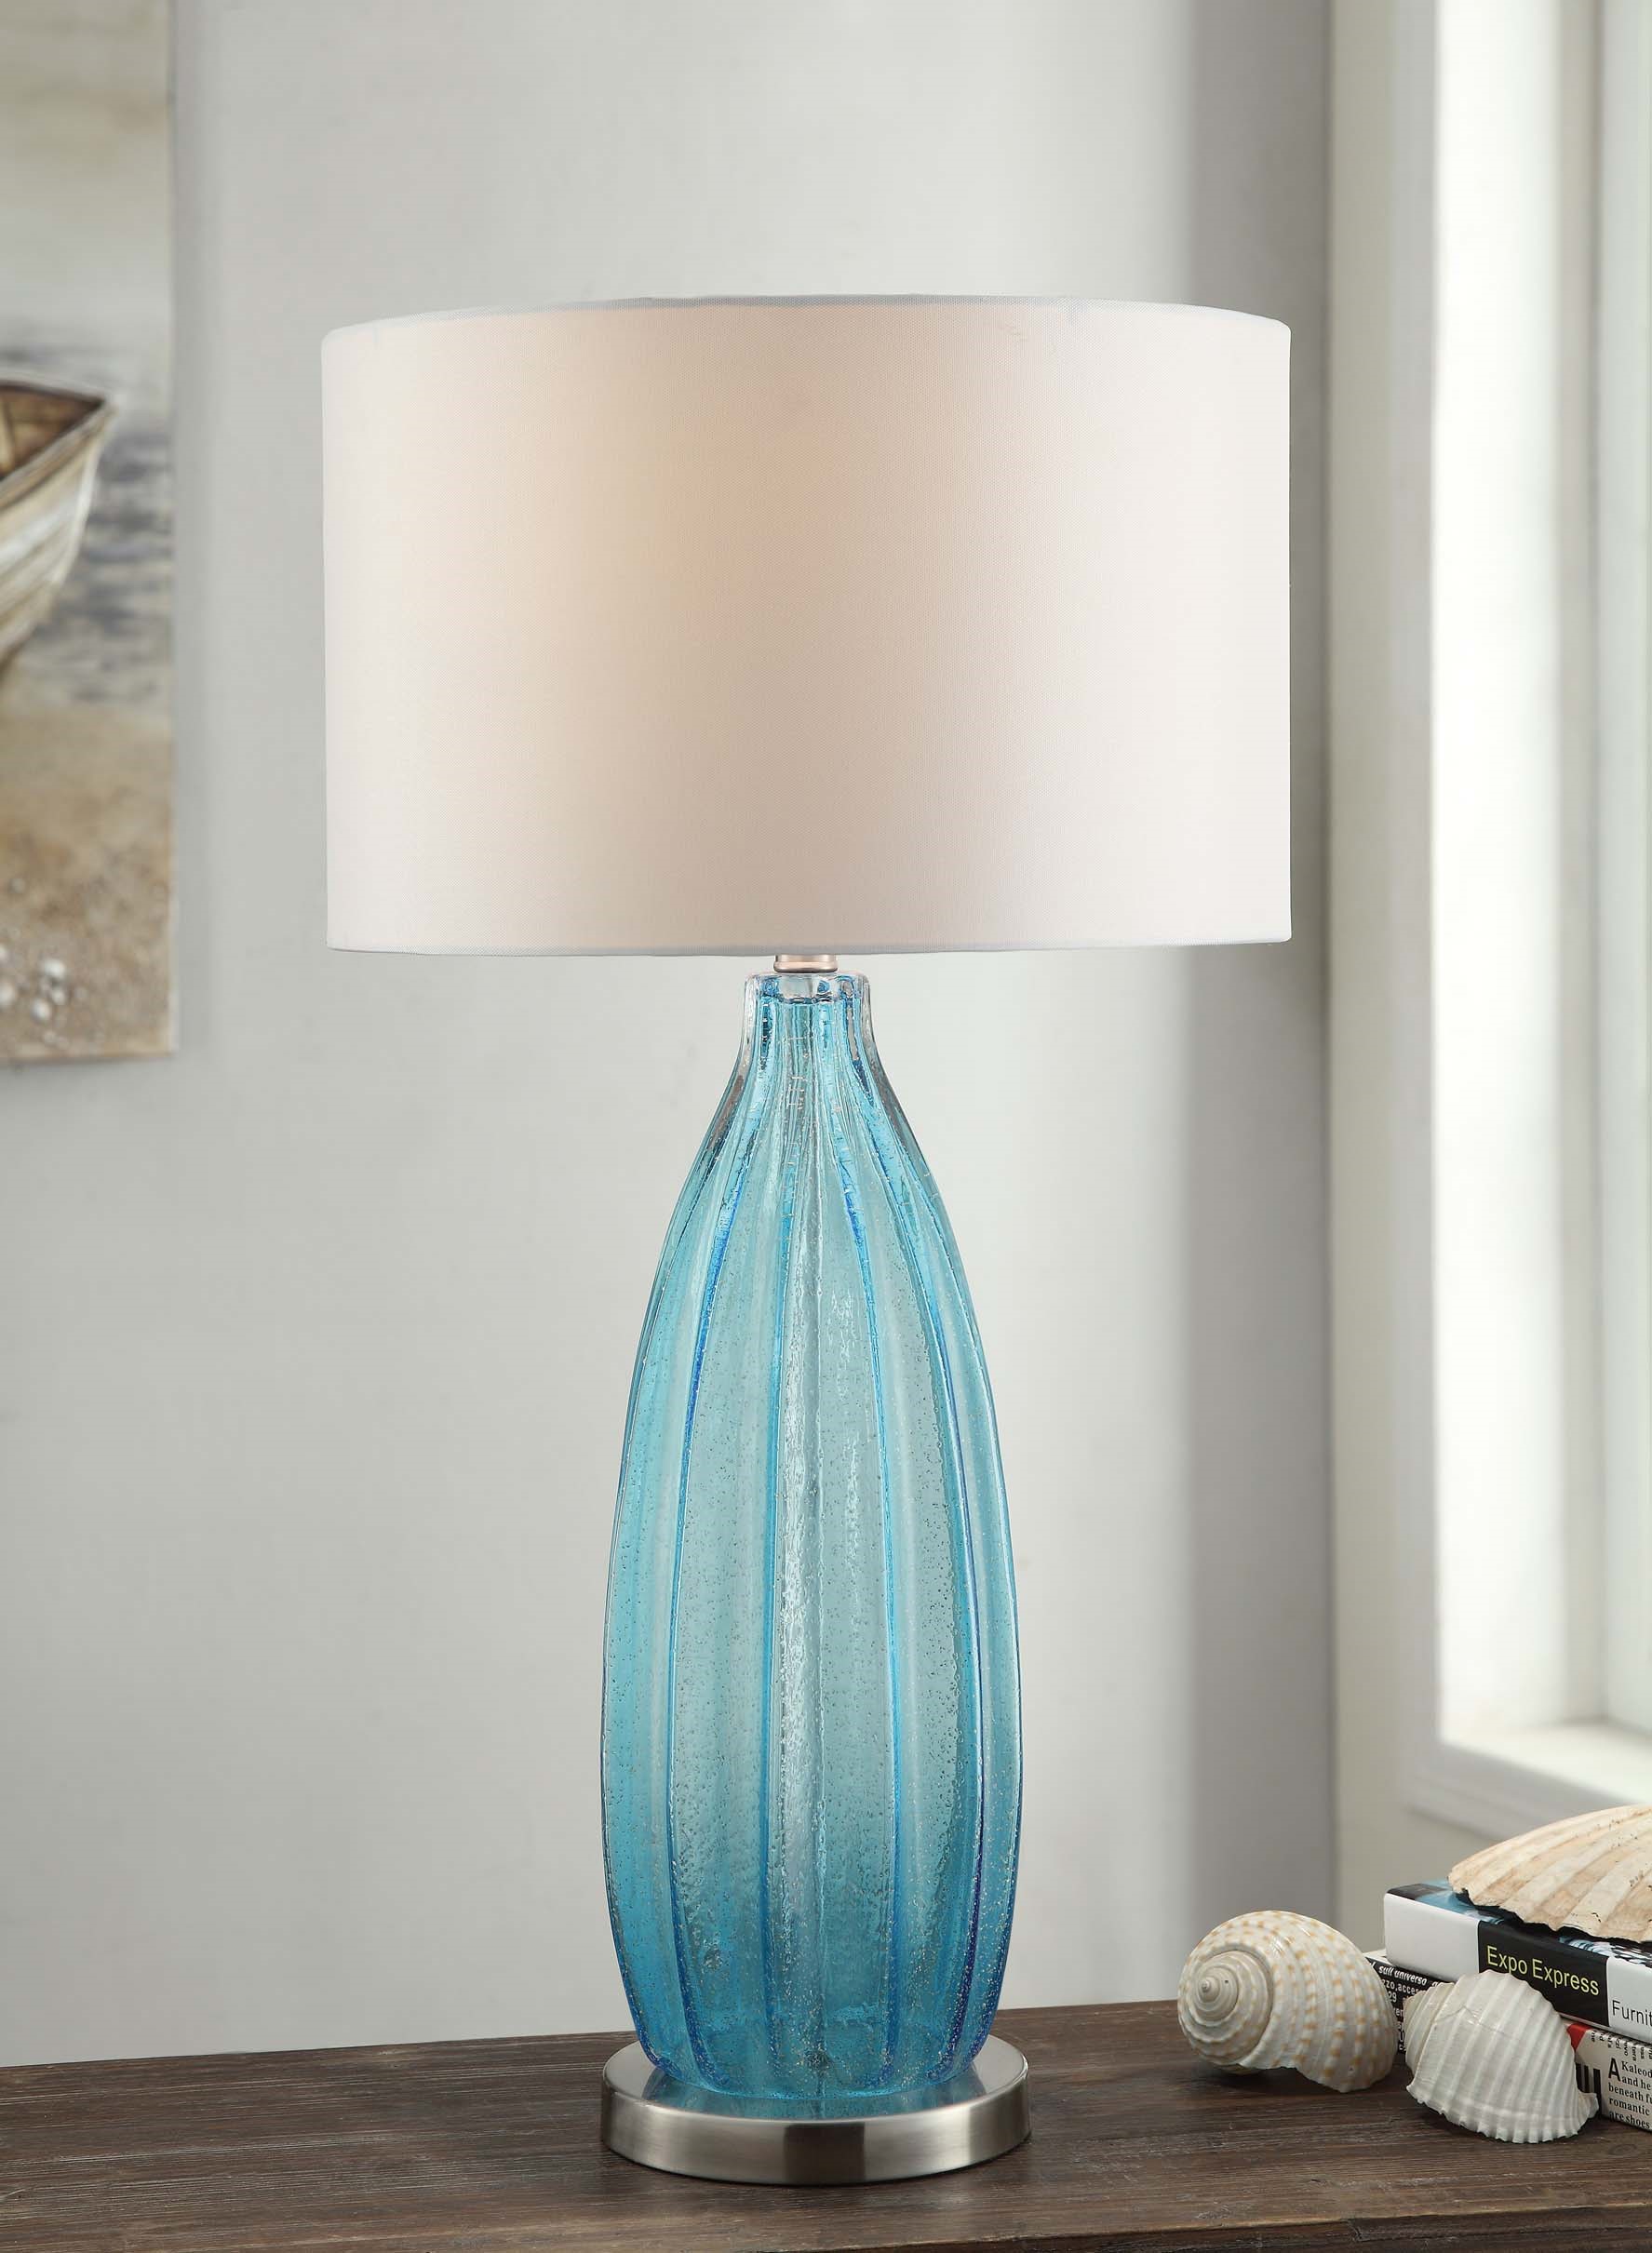 Blue Glass Table Lamp - image 2 of 2